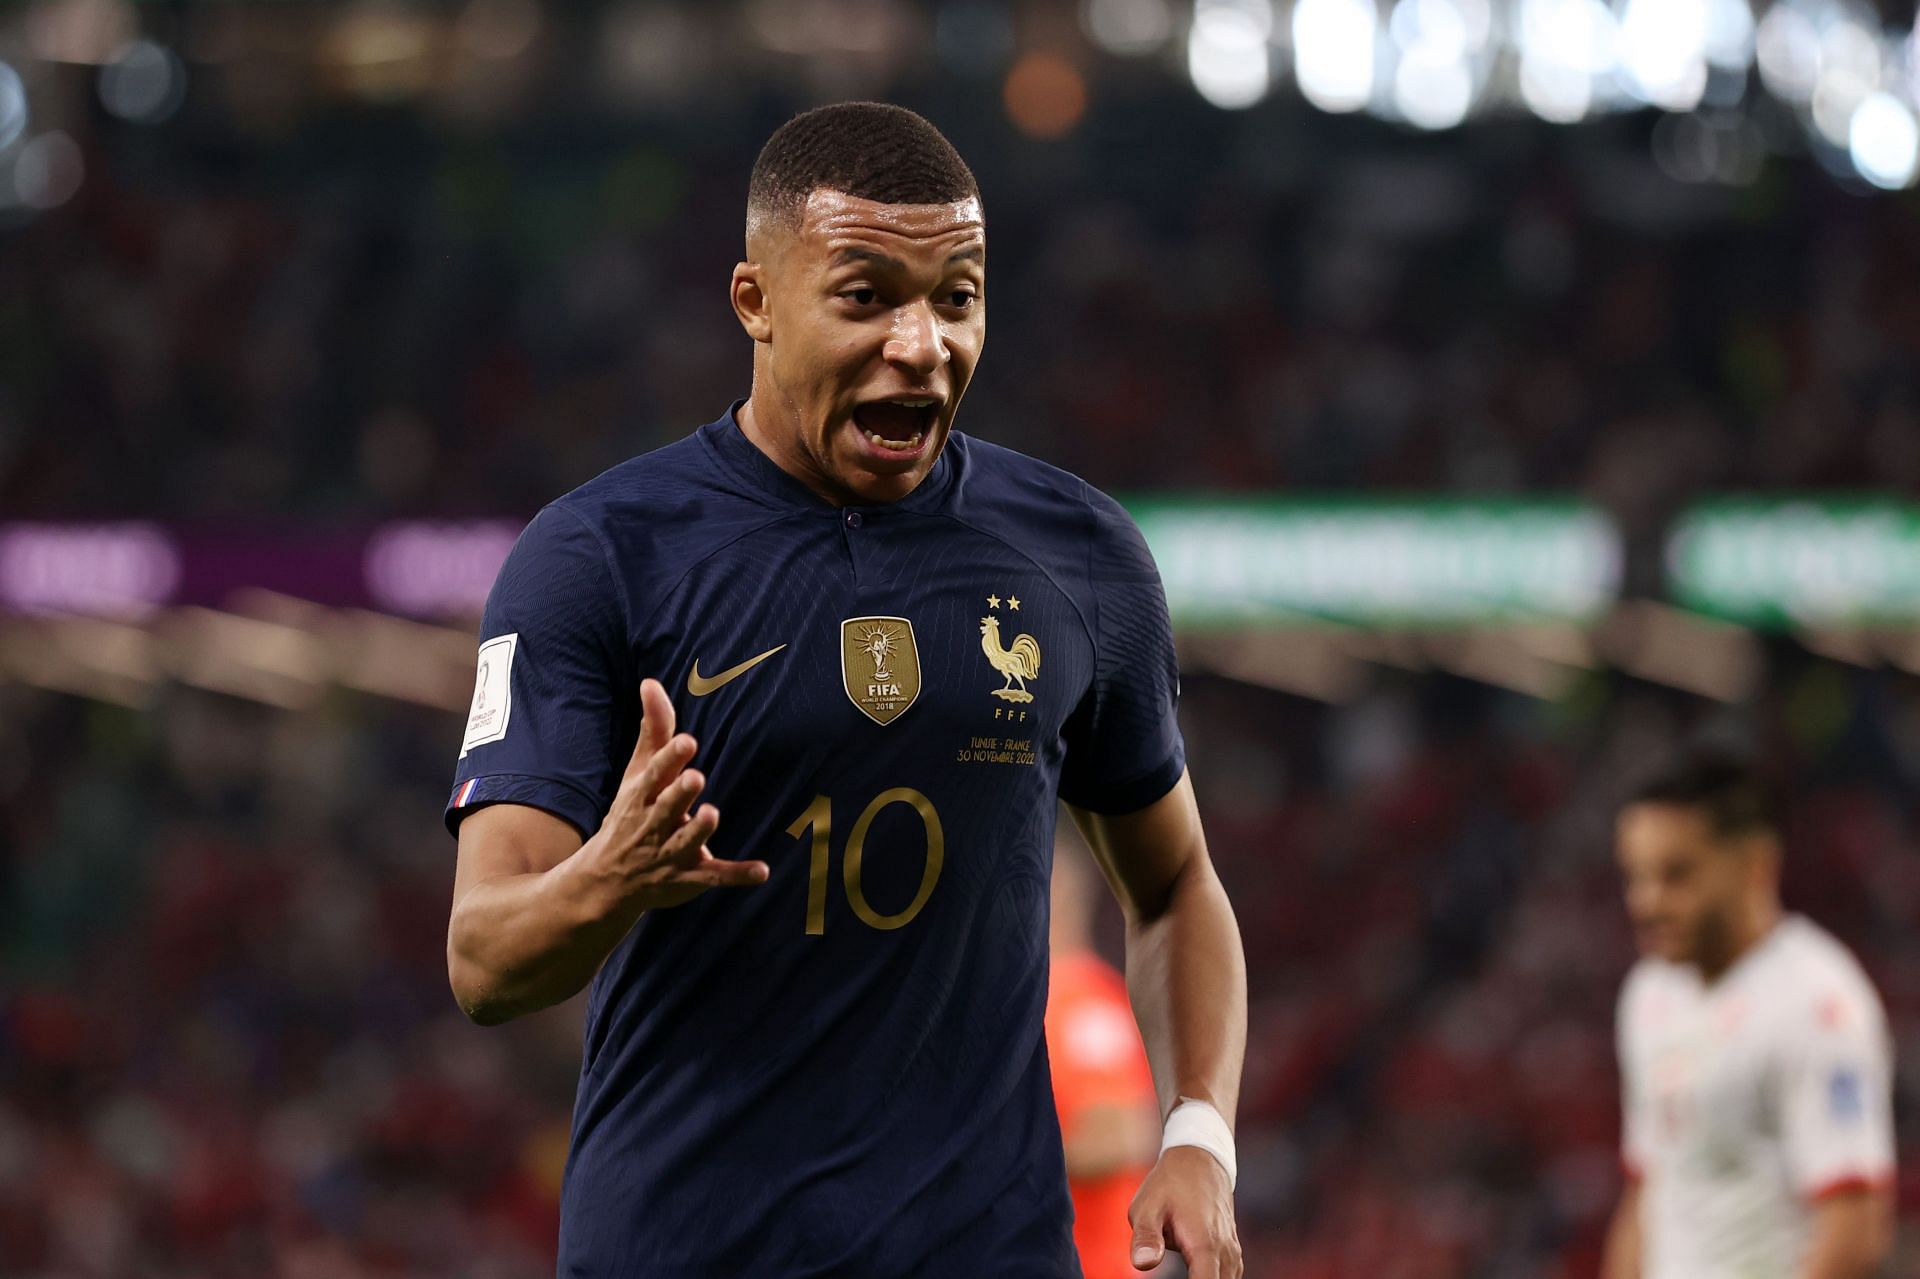 Kylian Mbappe has been in red-hot form for club and country this season,